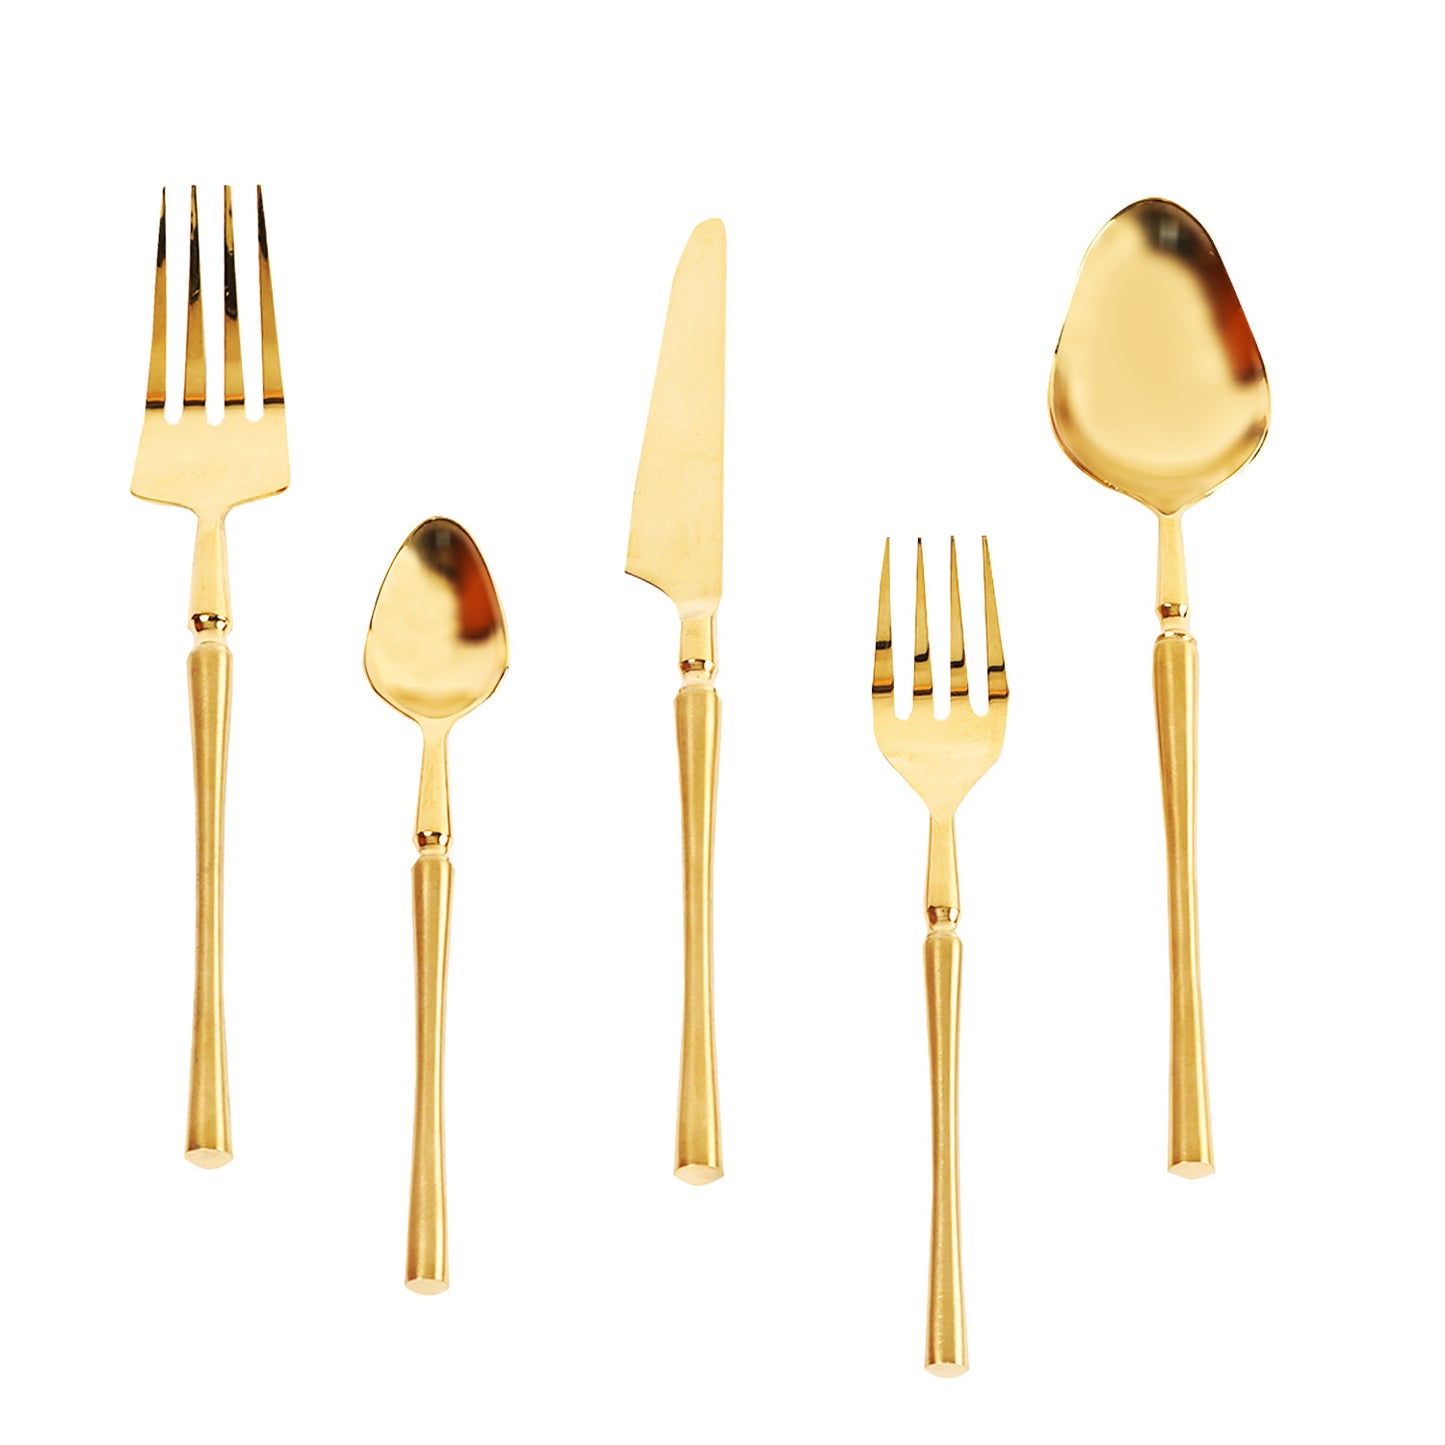 Graceful Contours: Set of 5 Cutlery with Curvy Handles